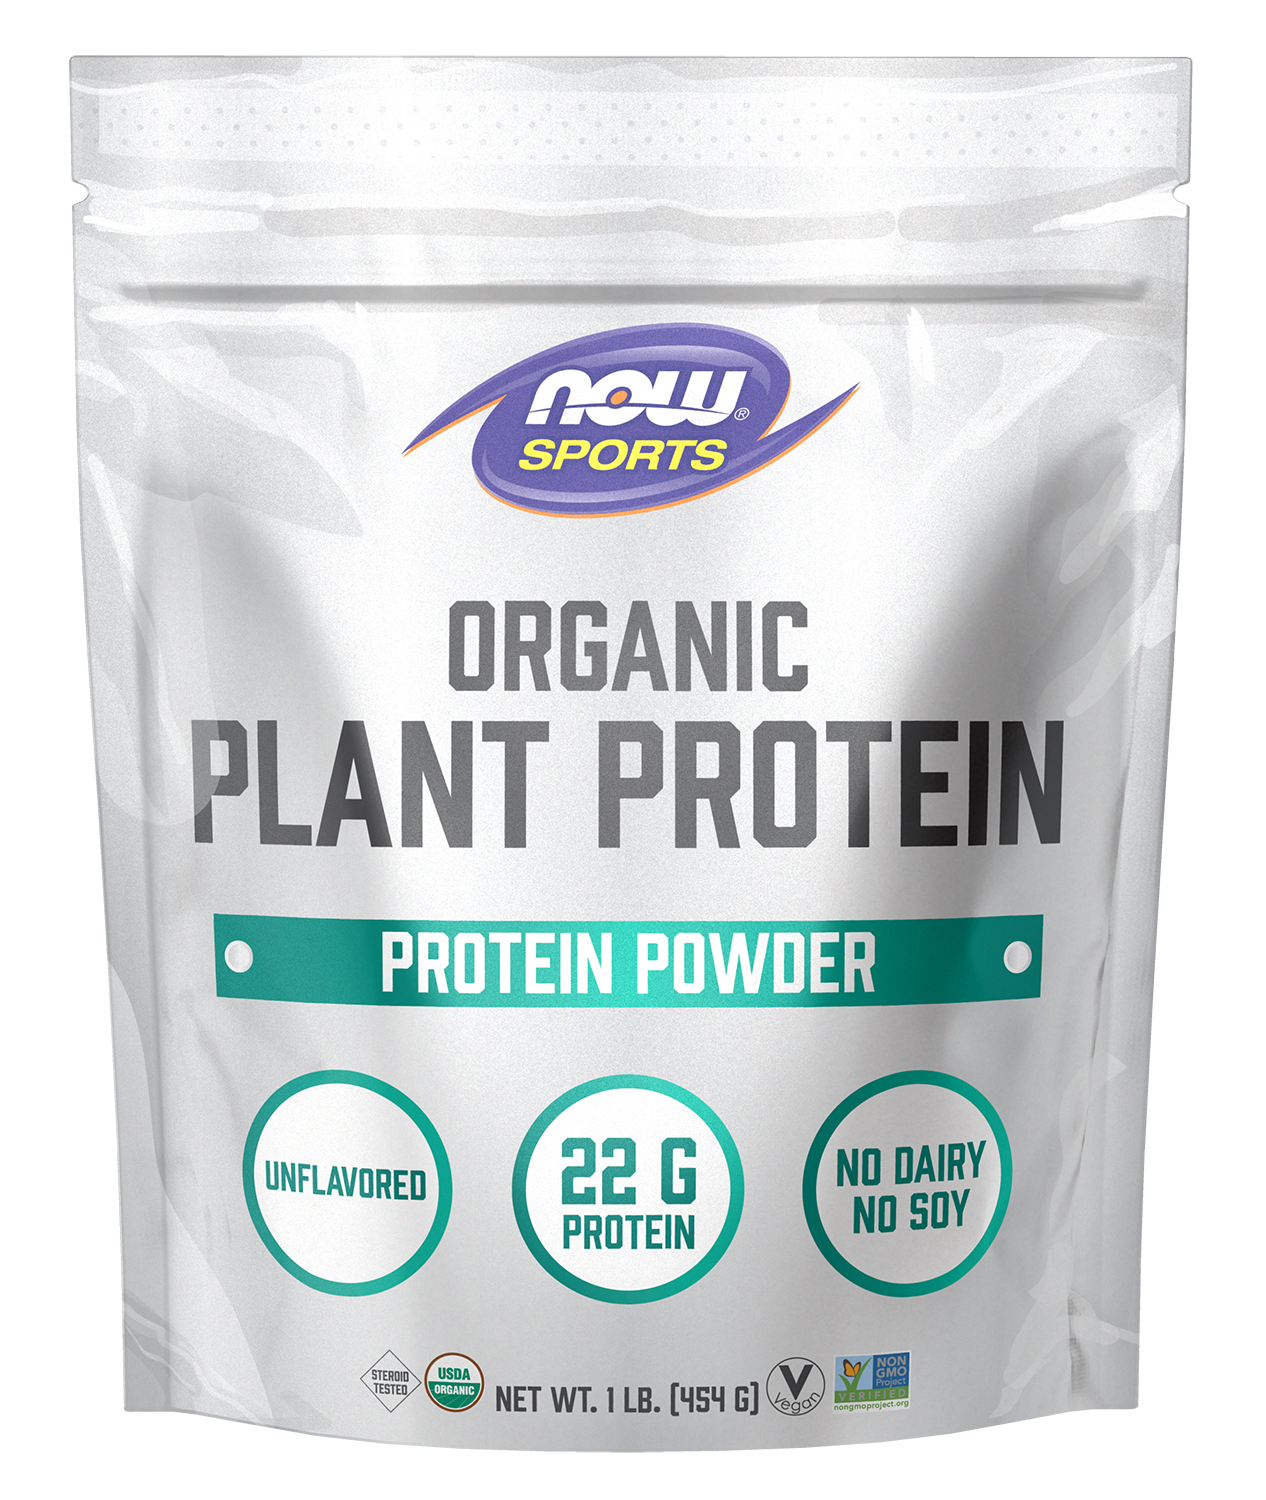 Plant Protein, Organic Unflavored Powder - 1 lb.